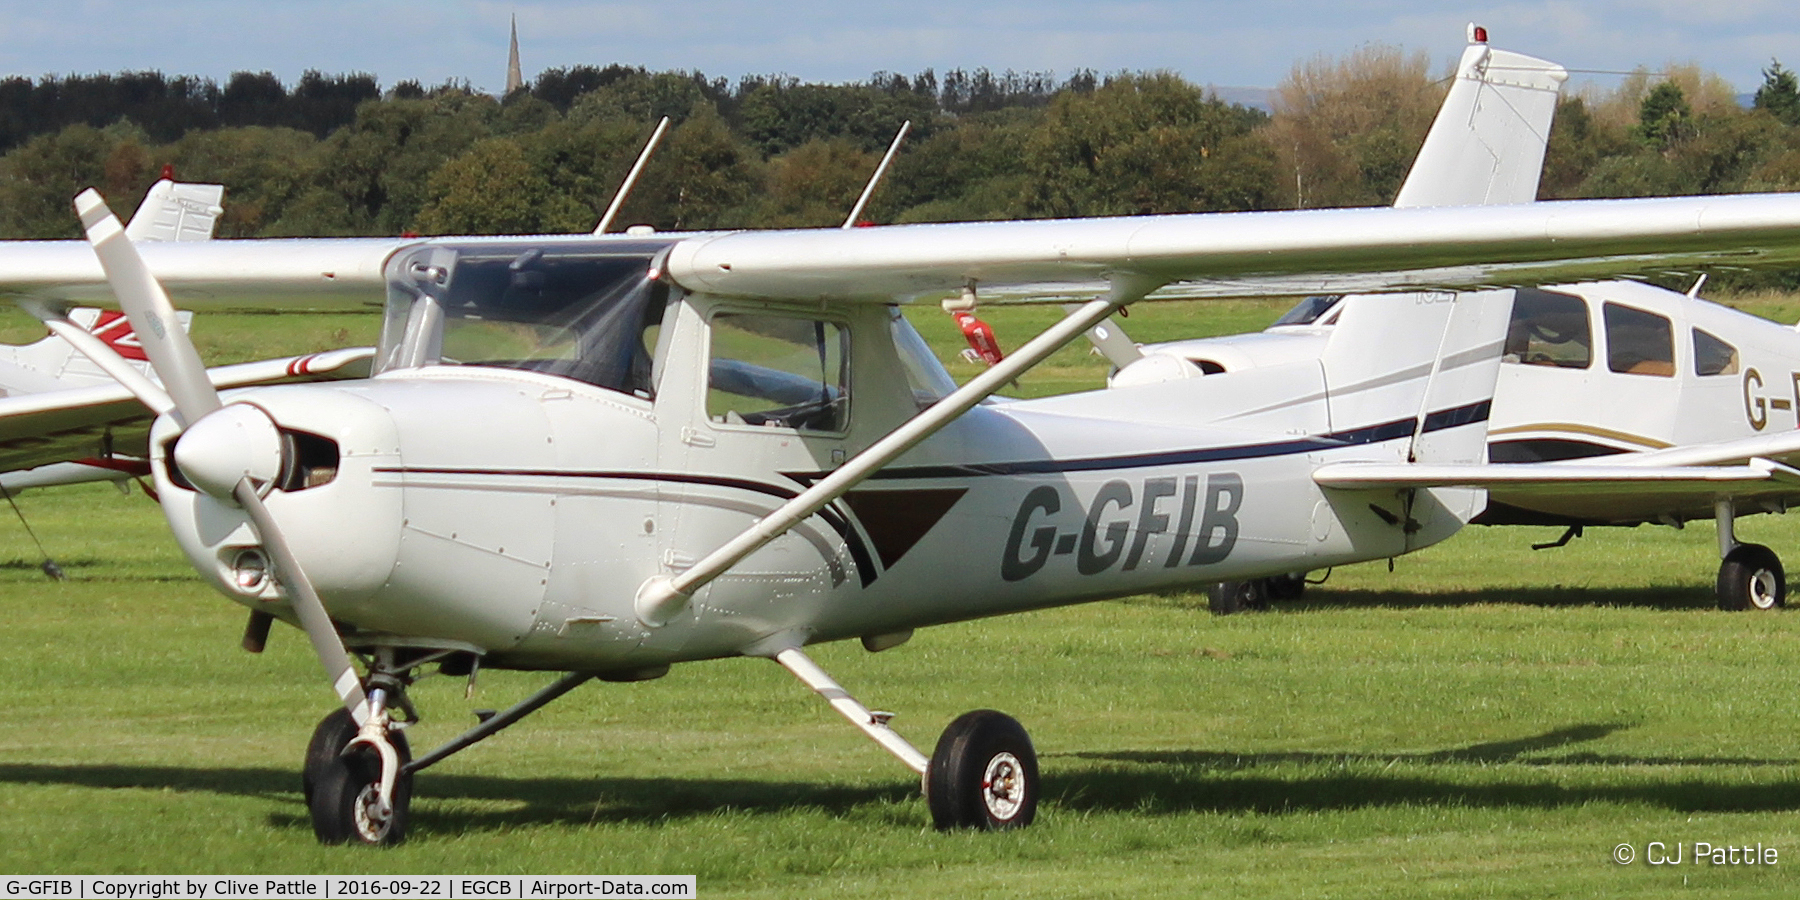 G-GFIB, 1979 Reims F152 C/N 1556, At the City Airport Manchester,  Barton EGCB